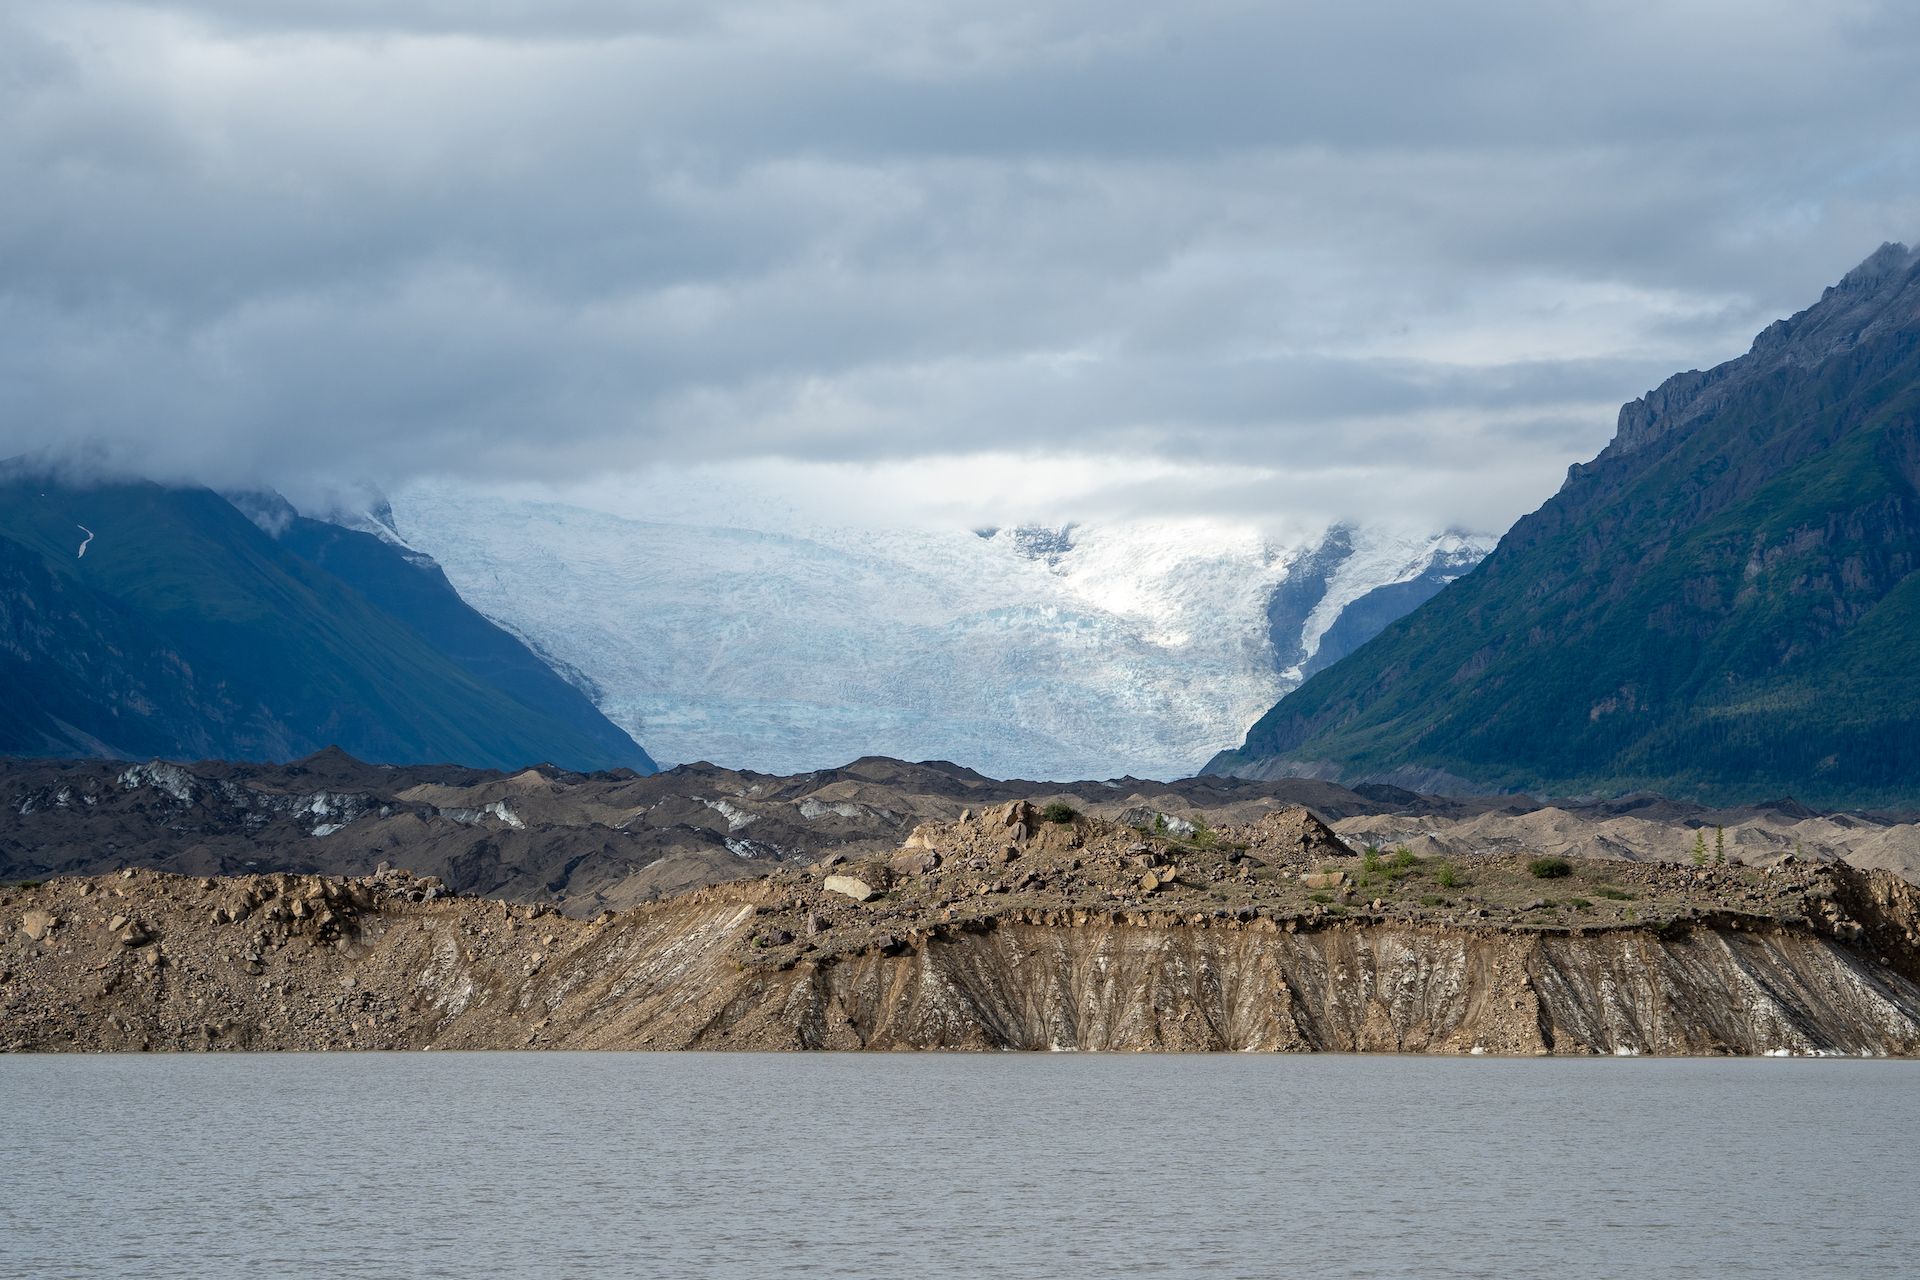 Picture taken from where we camped. At the toe of the glacier, you can clearly see the different stages of the glacier from pure blue ice to moraine to water.